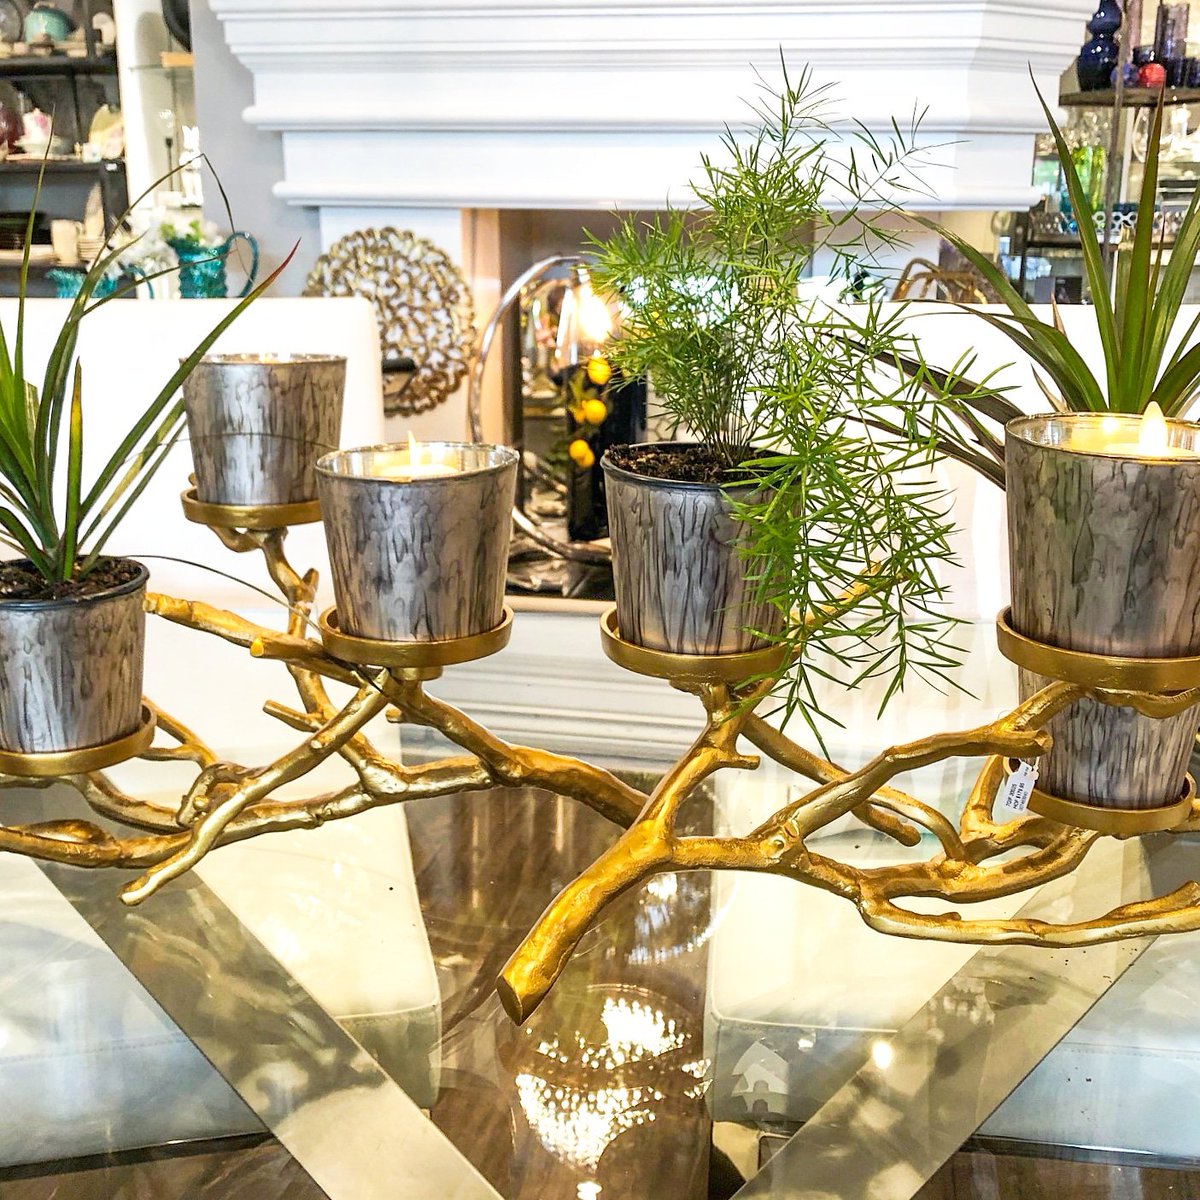 A candle holder that doesn't have to hold just candles. We've brought these little candle pots to life with plants.
#candleholder #creativedecorideas #inspiredbynature #centrepieceideas #decoratingwithplants #candles #candlelight #decorideas #designdetails